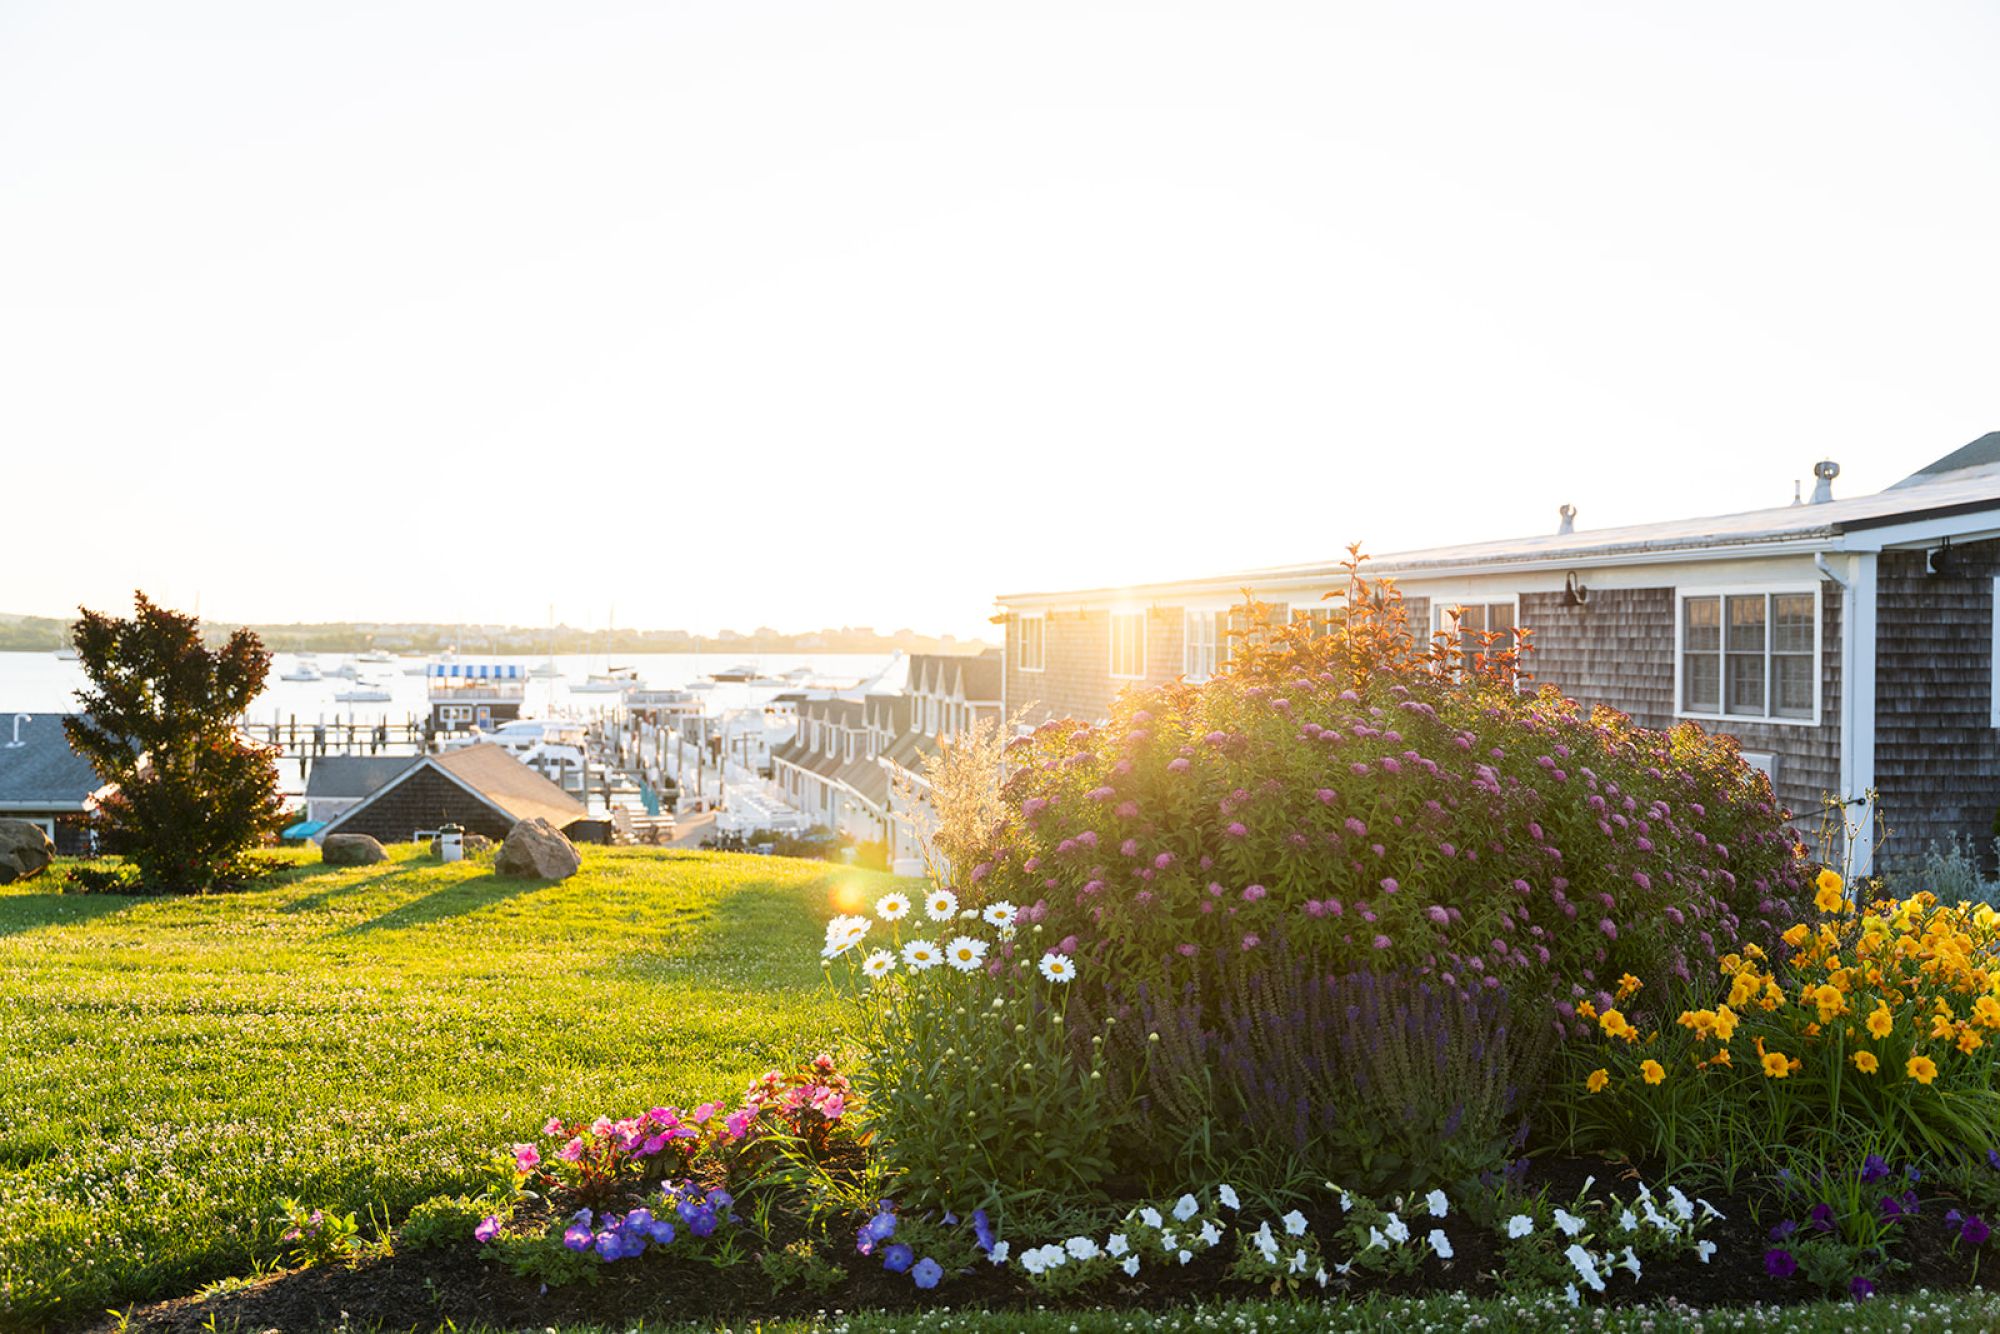 A beautiful garden with colorful flowers in the foreground and seaside cottages overlooking a harbor at sunset in the background.